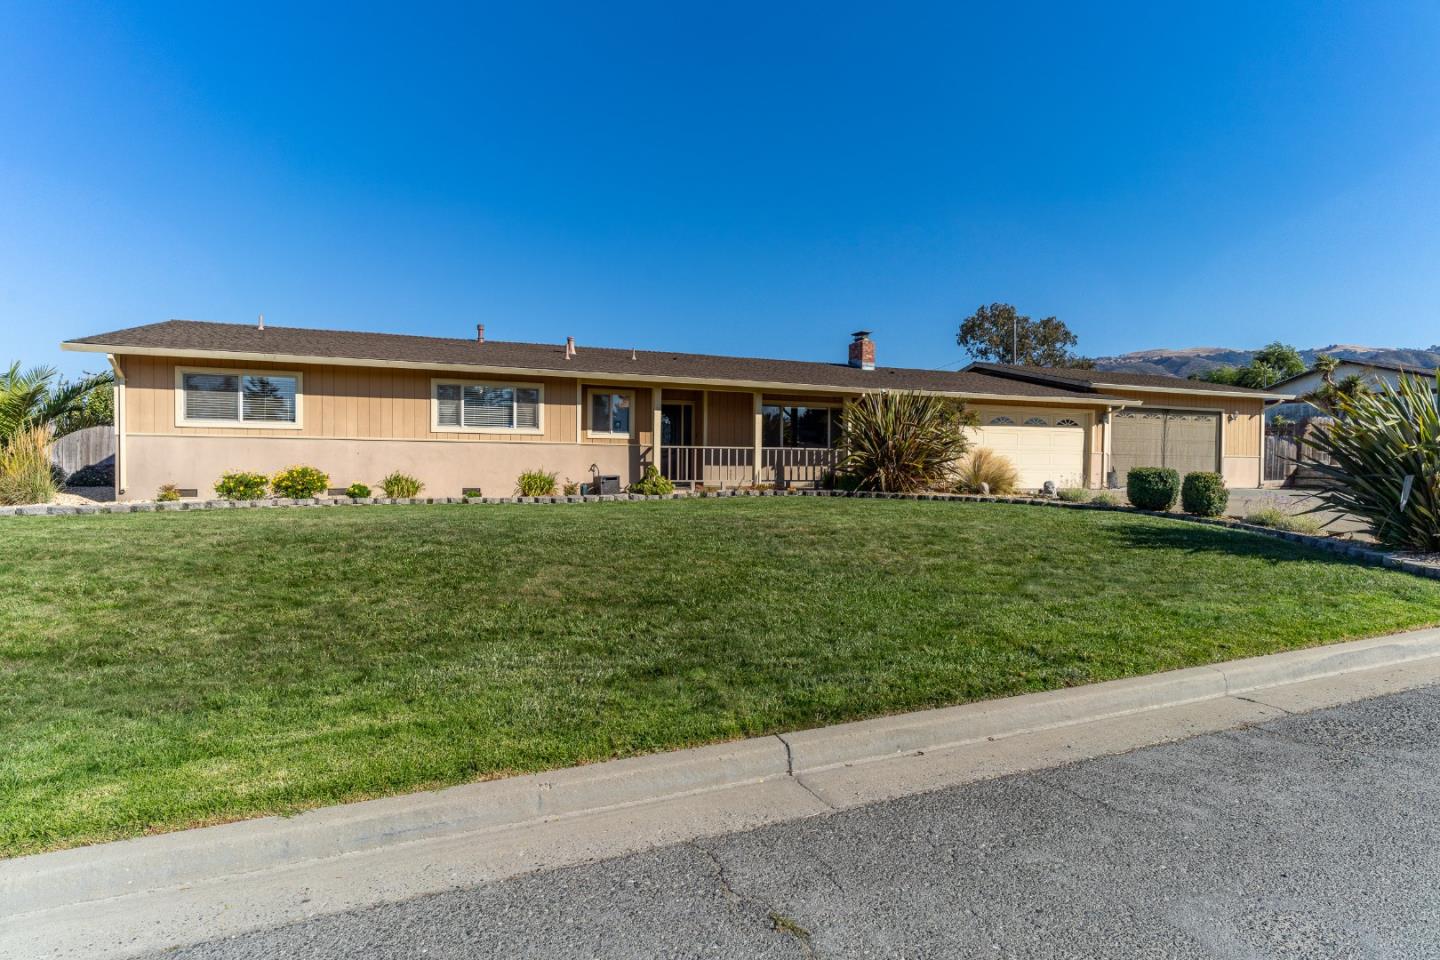 Photo of 22115 Berry Dr in Salinas, CA